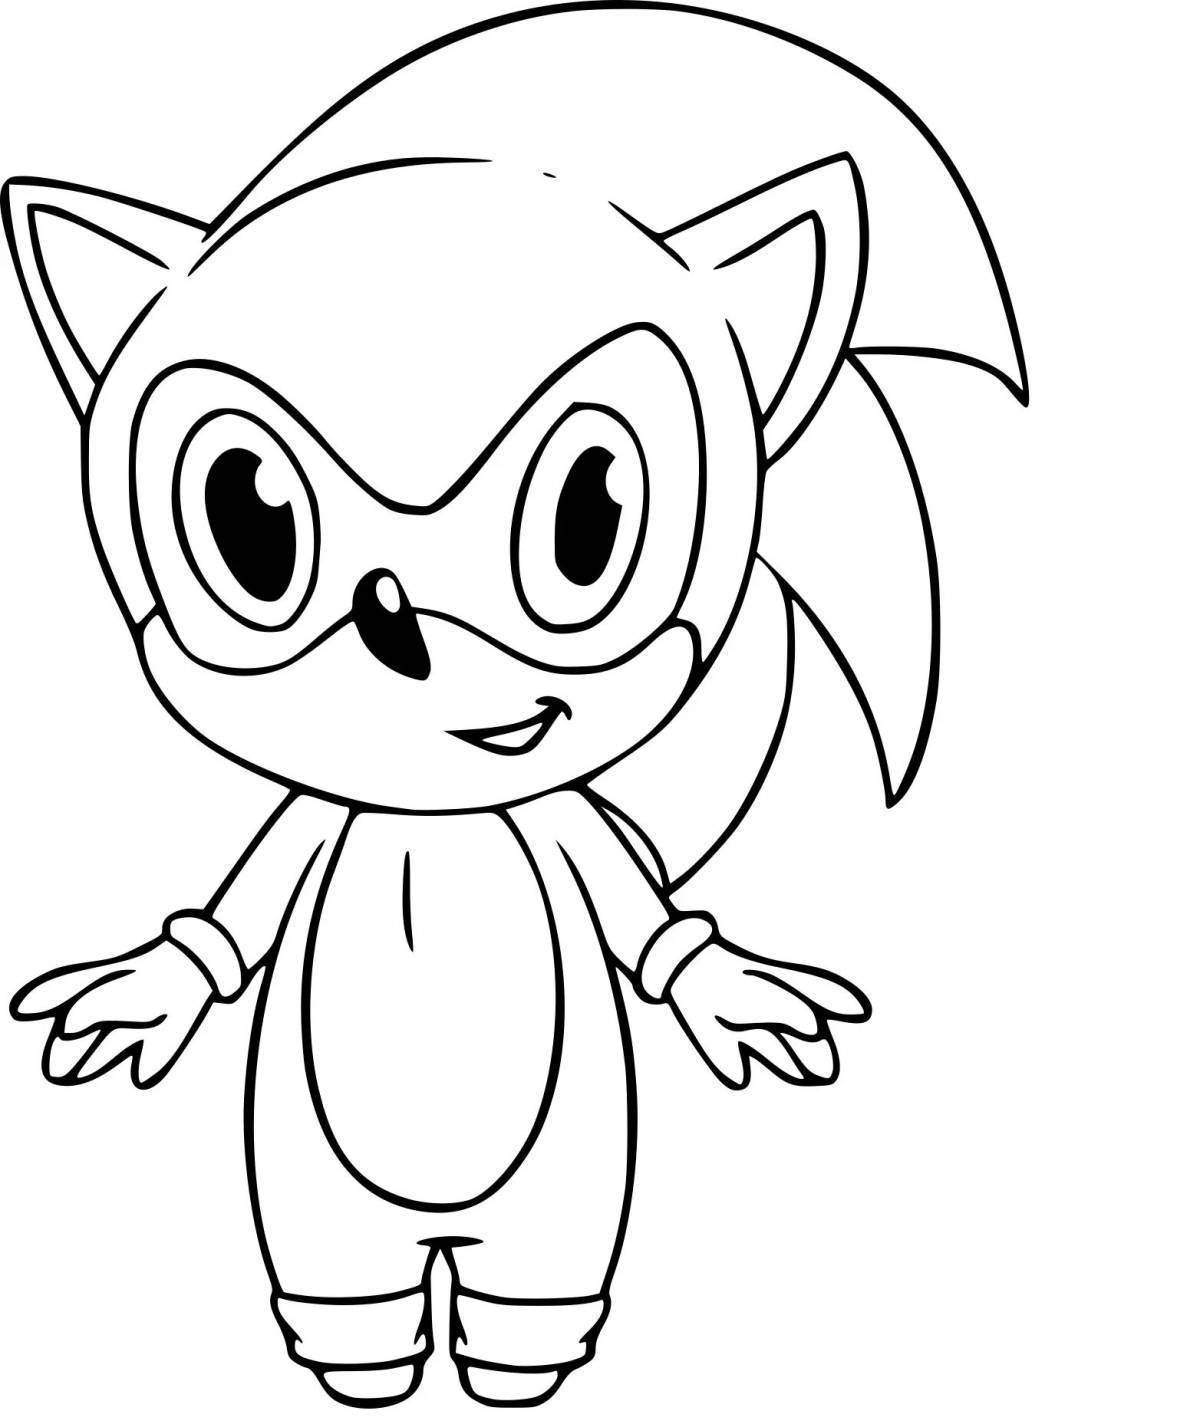 Playful sonic coloring book for kids 5-6 years old